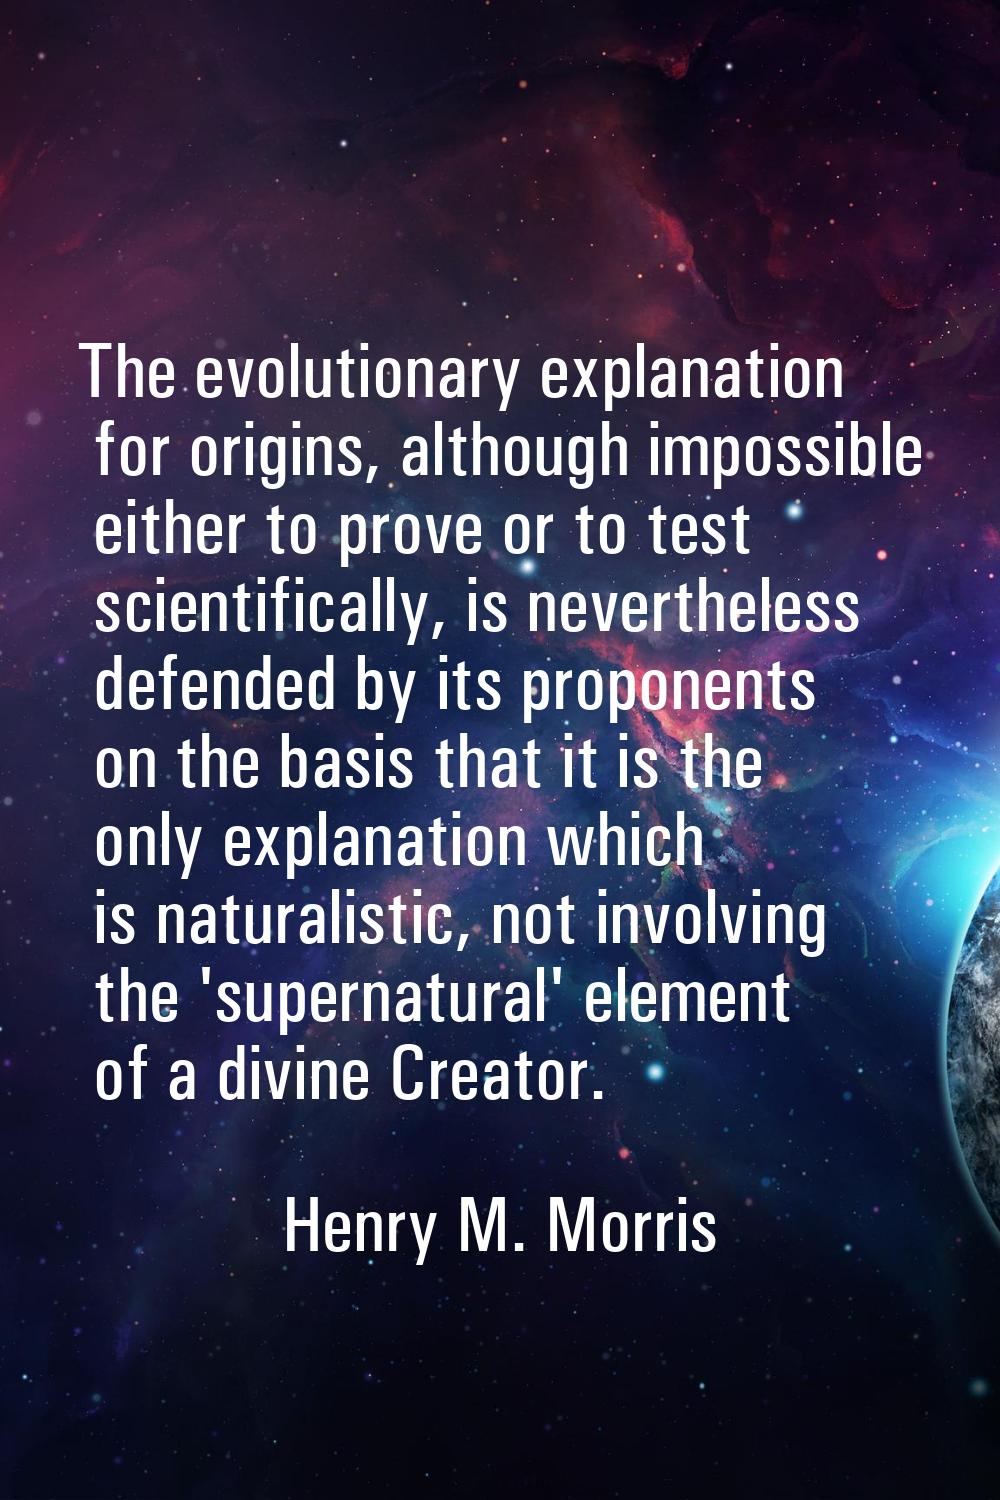 The evolutionary explanation for origins, although impossible either to prove or to test scientific